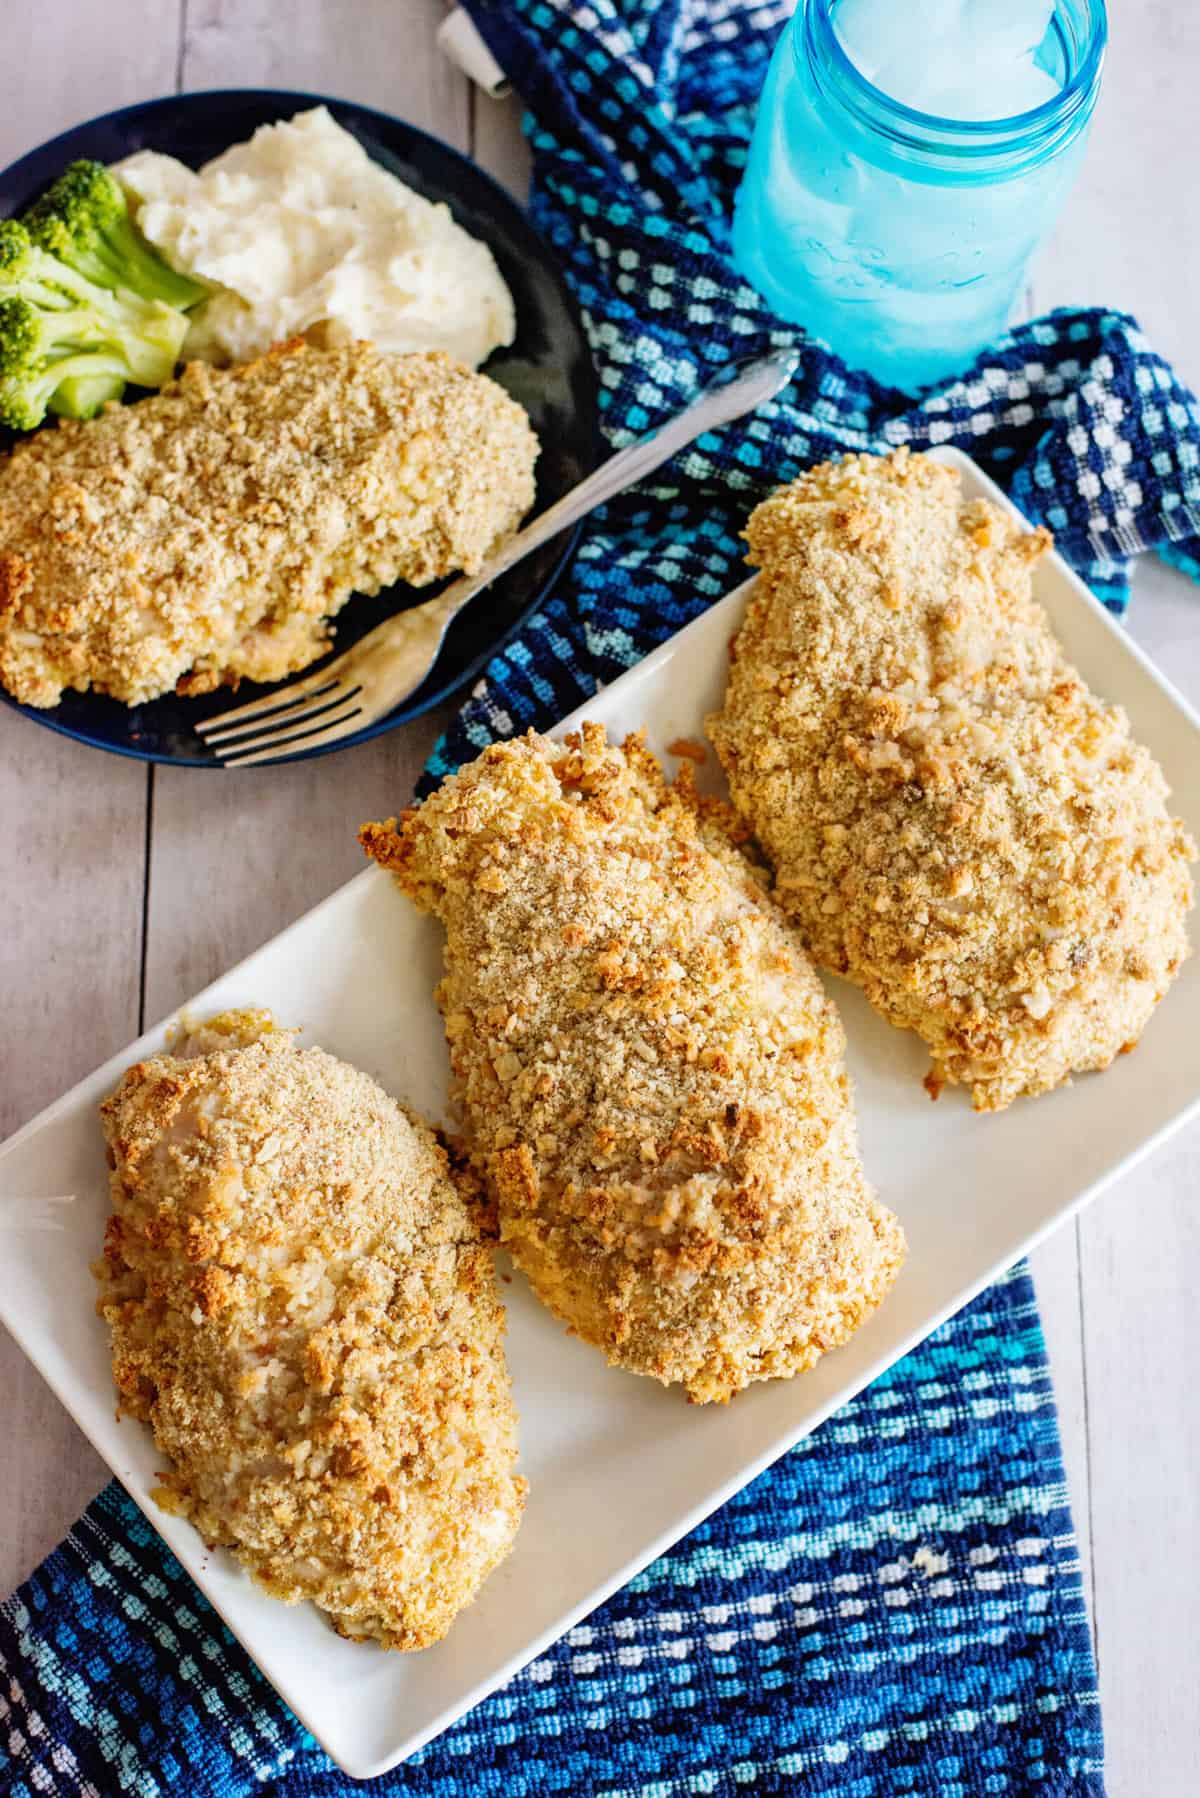 baked stuffing-coated chicken